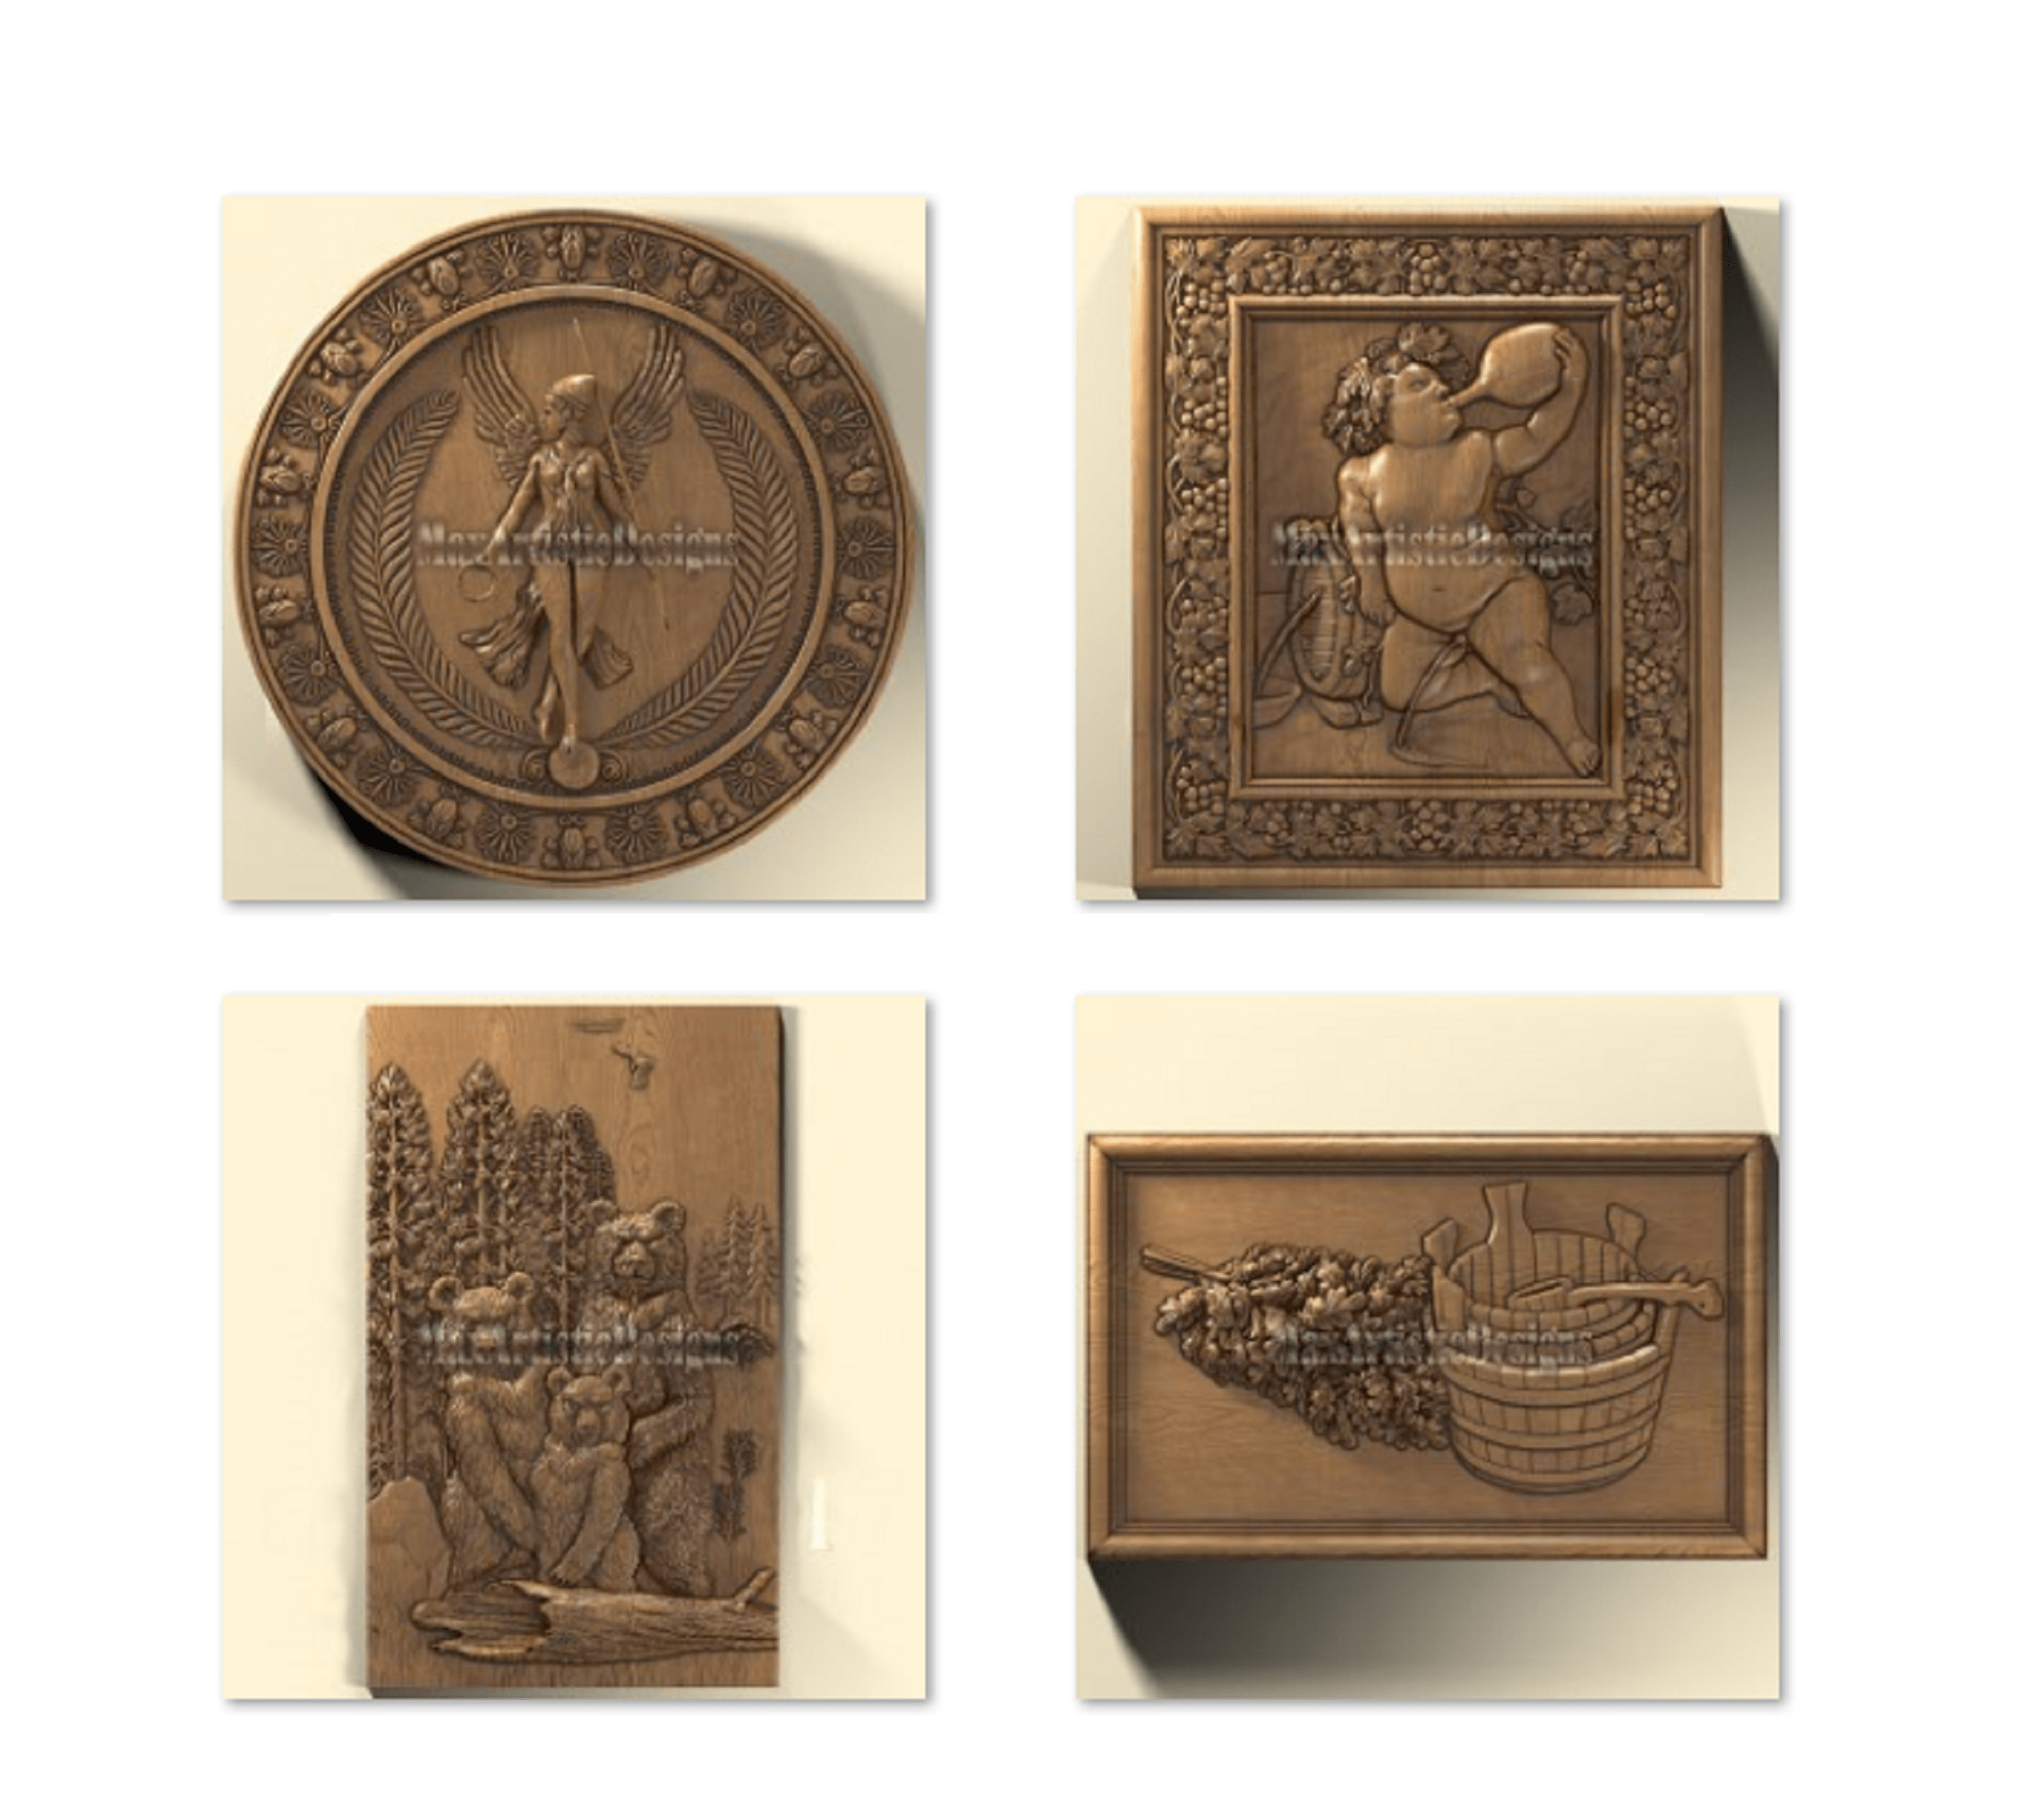 38+ pieces of 3d stl models for bas relief metal work for cnc routers, set v digital download